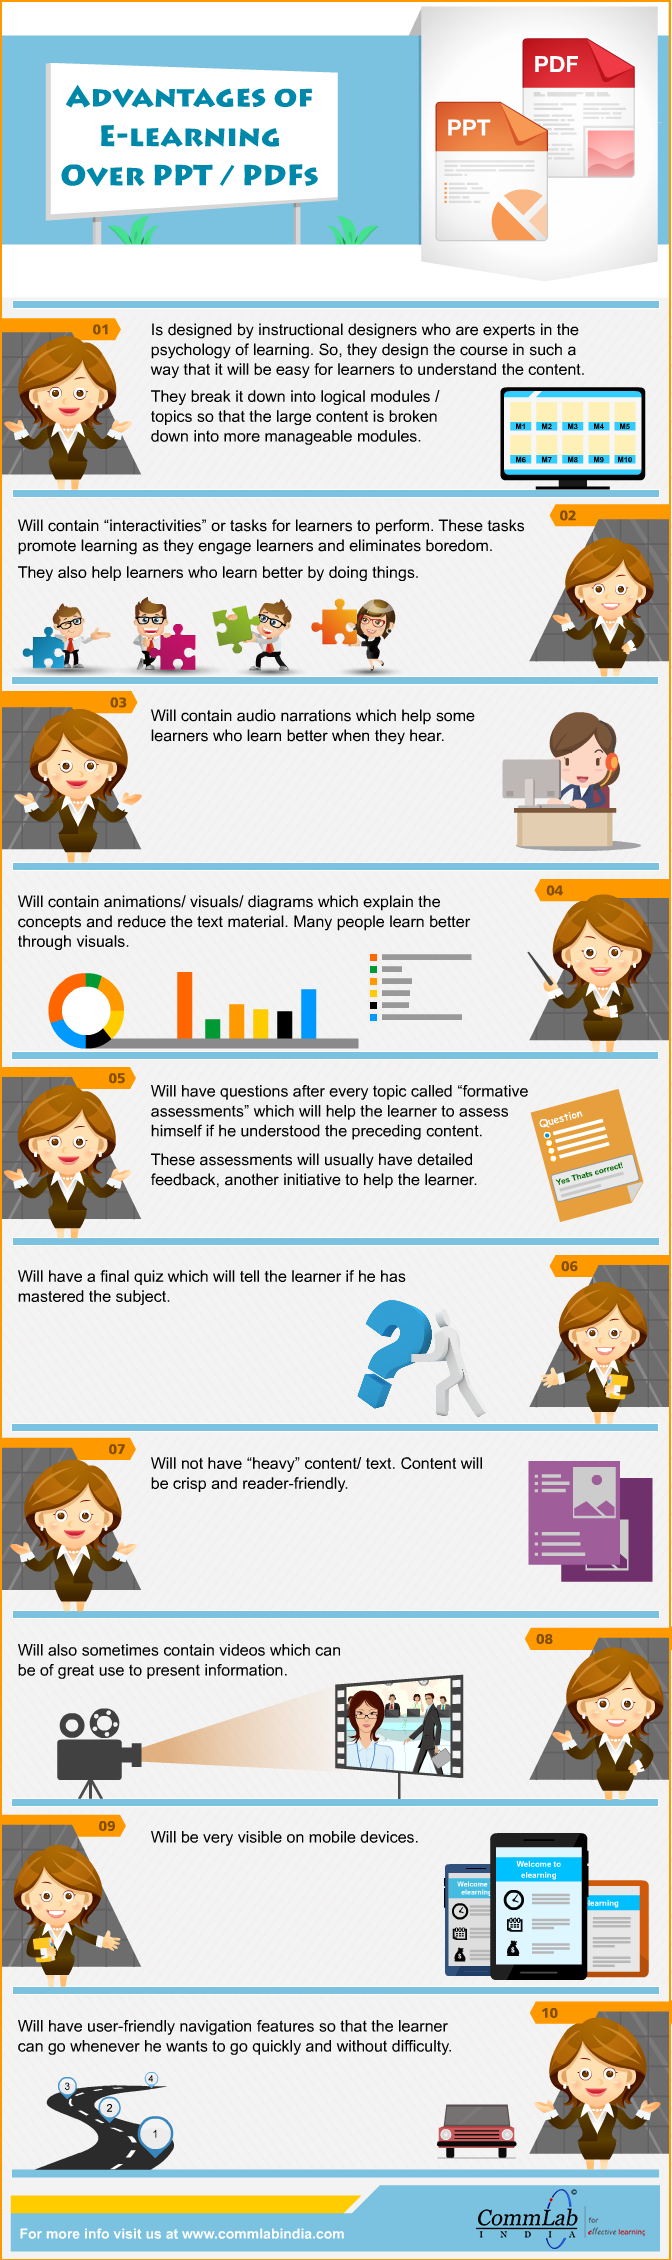 E-learning - Why Is It More Effective Than PPT and PDF Files [Infographic]